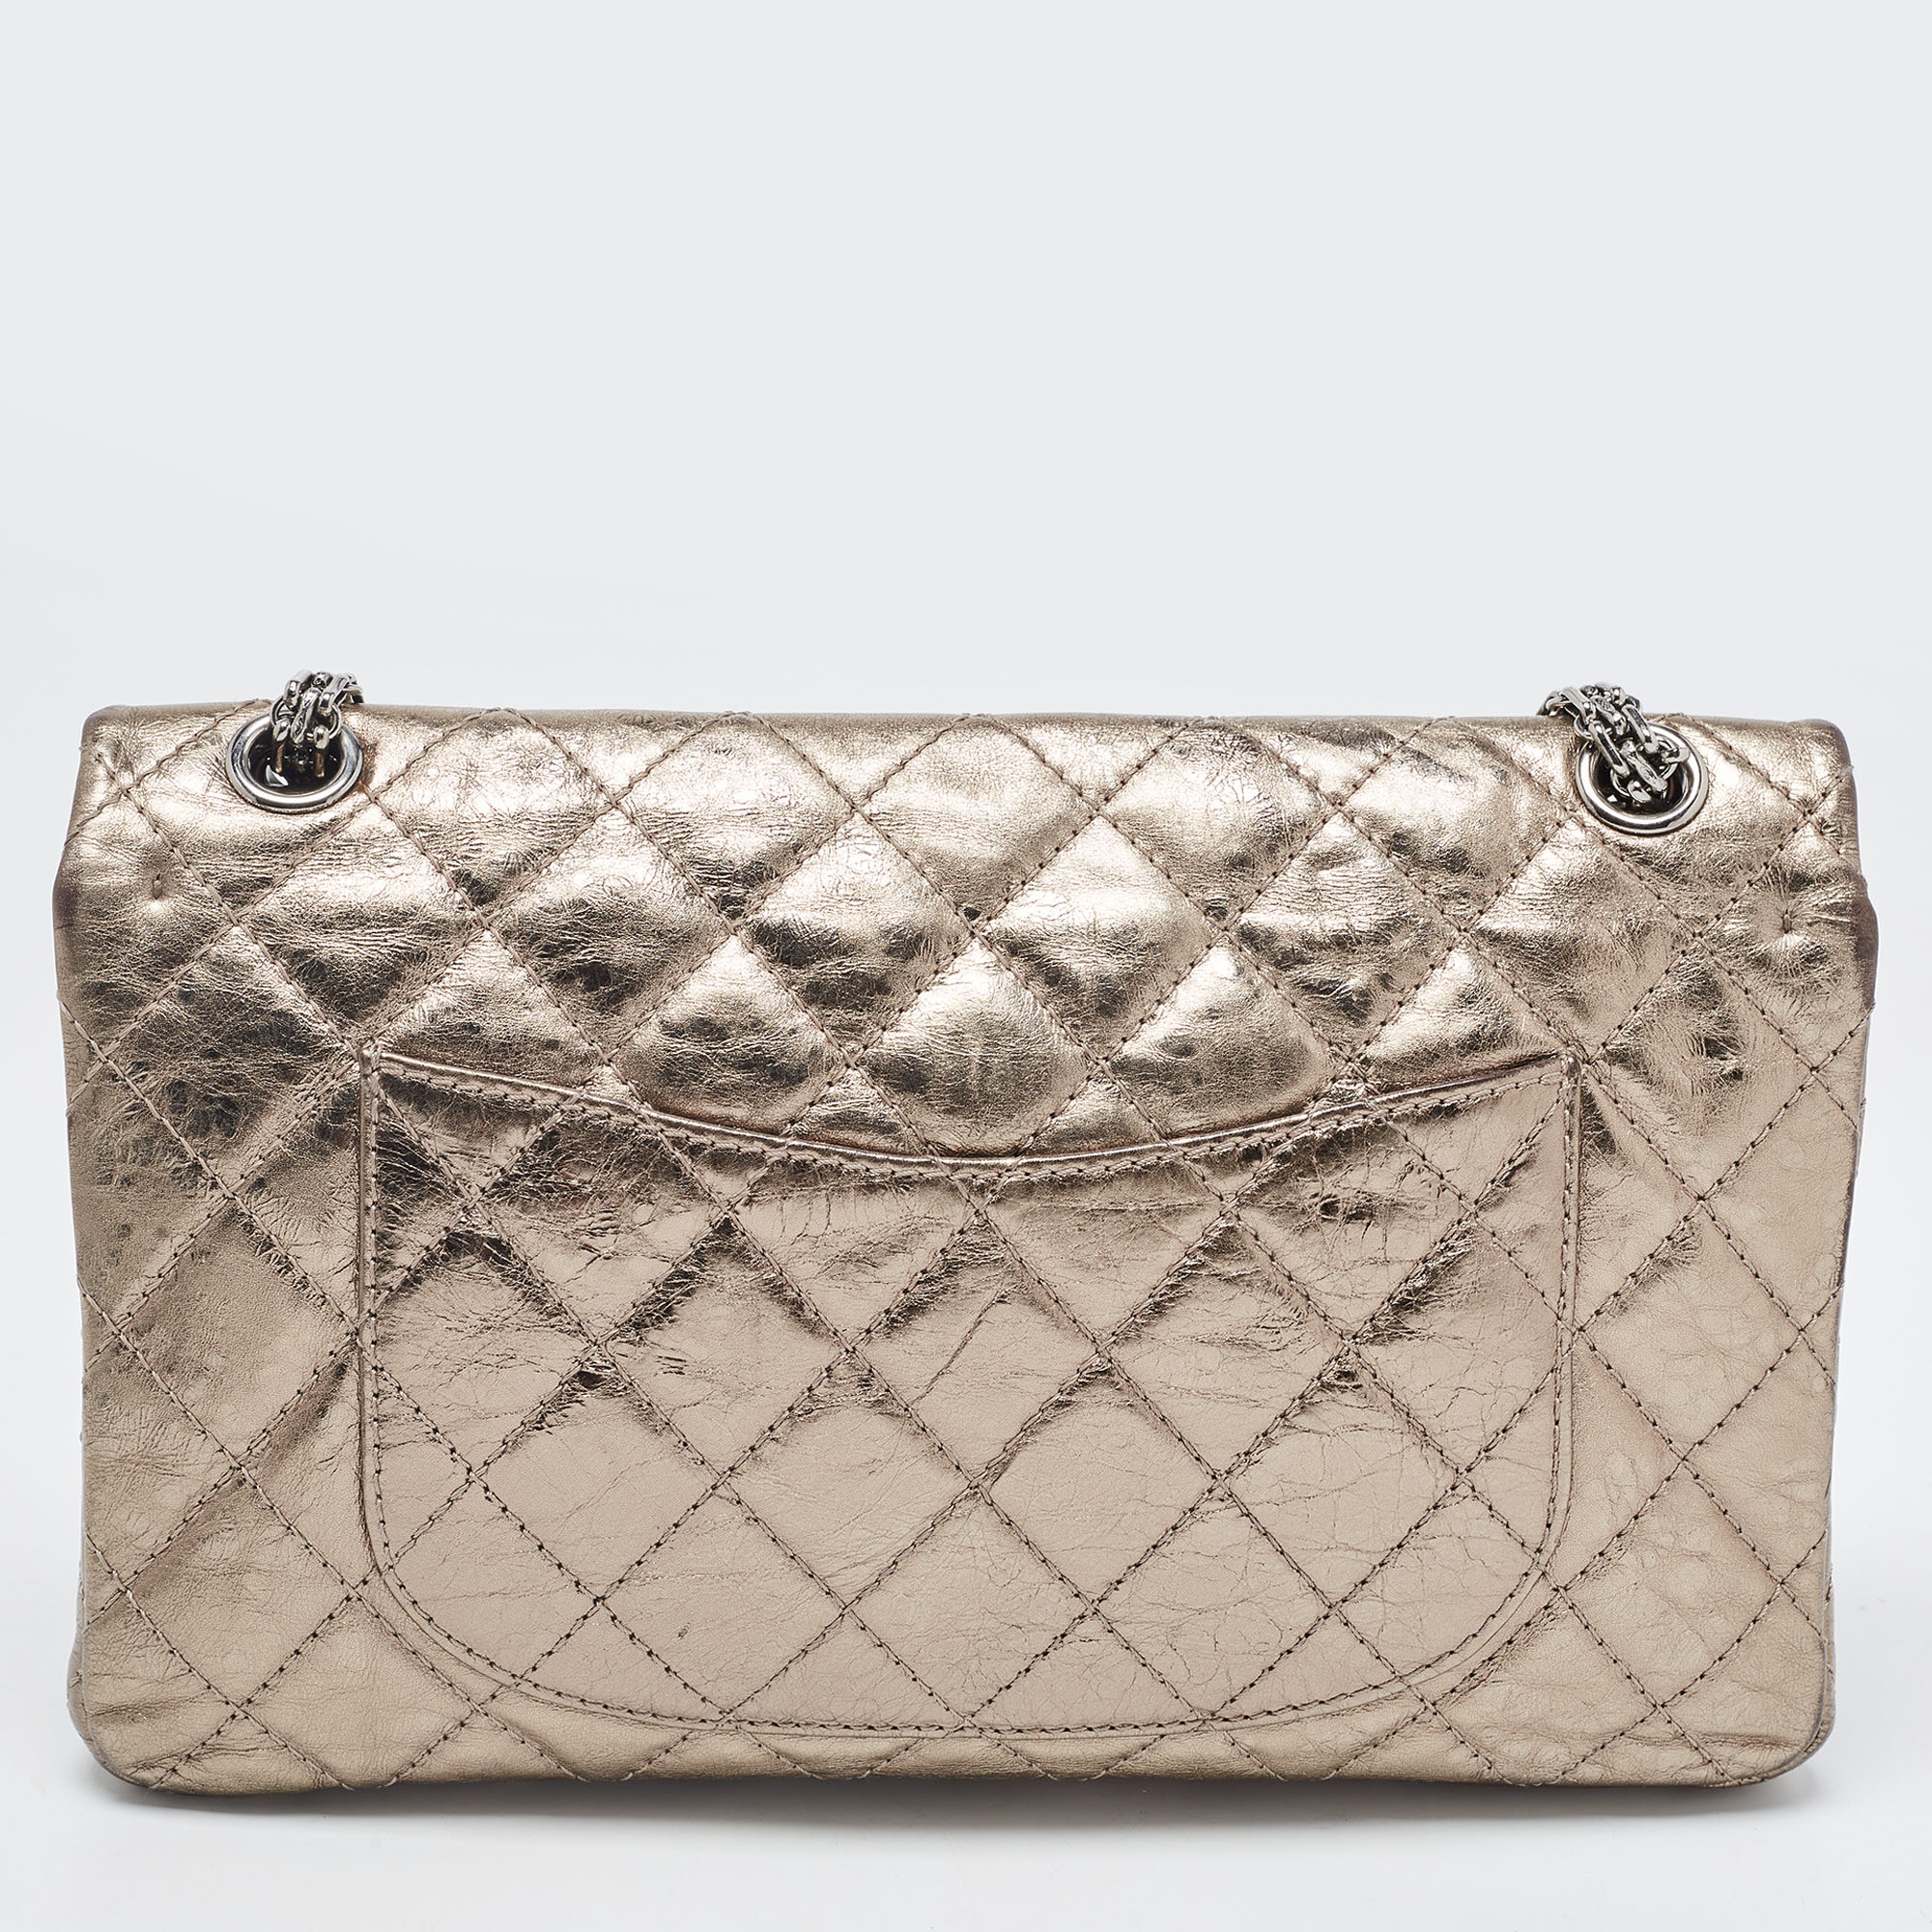 Chanel Metallic Quilted Aged Leather Reissue 2.55 Classic 226 Flap Bag